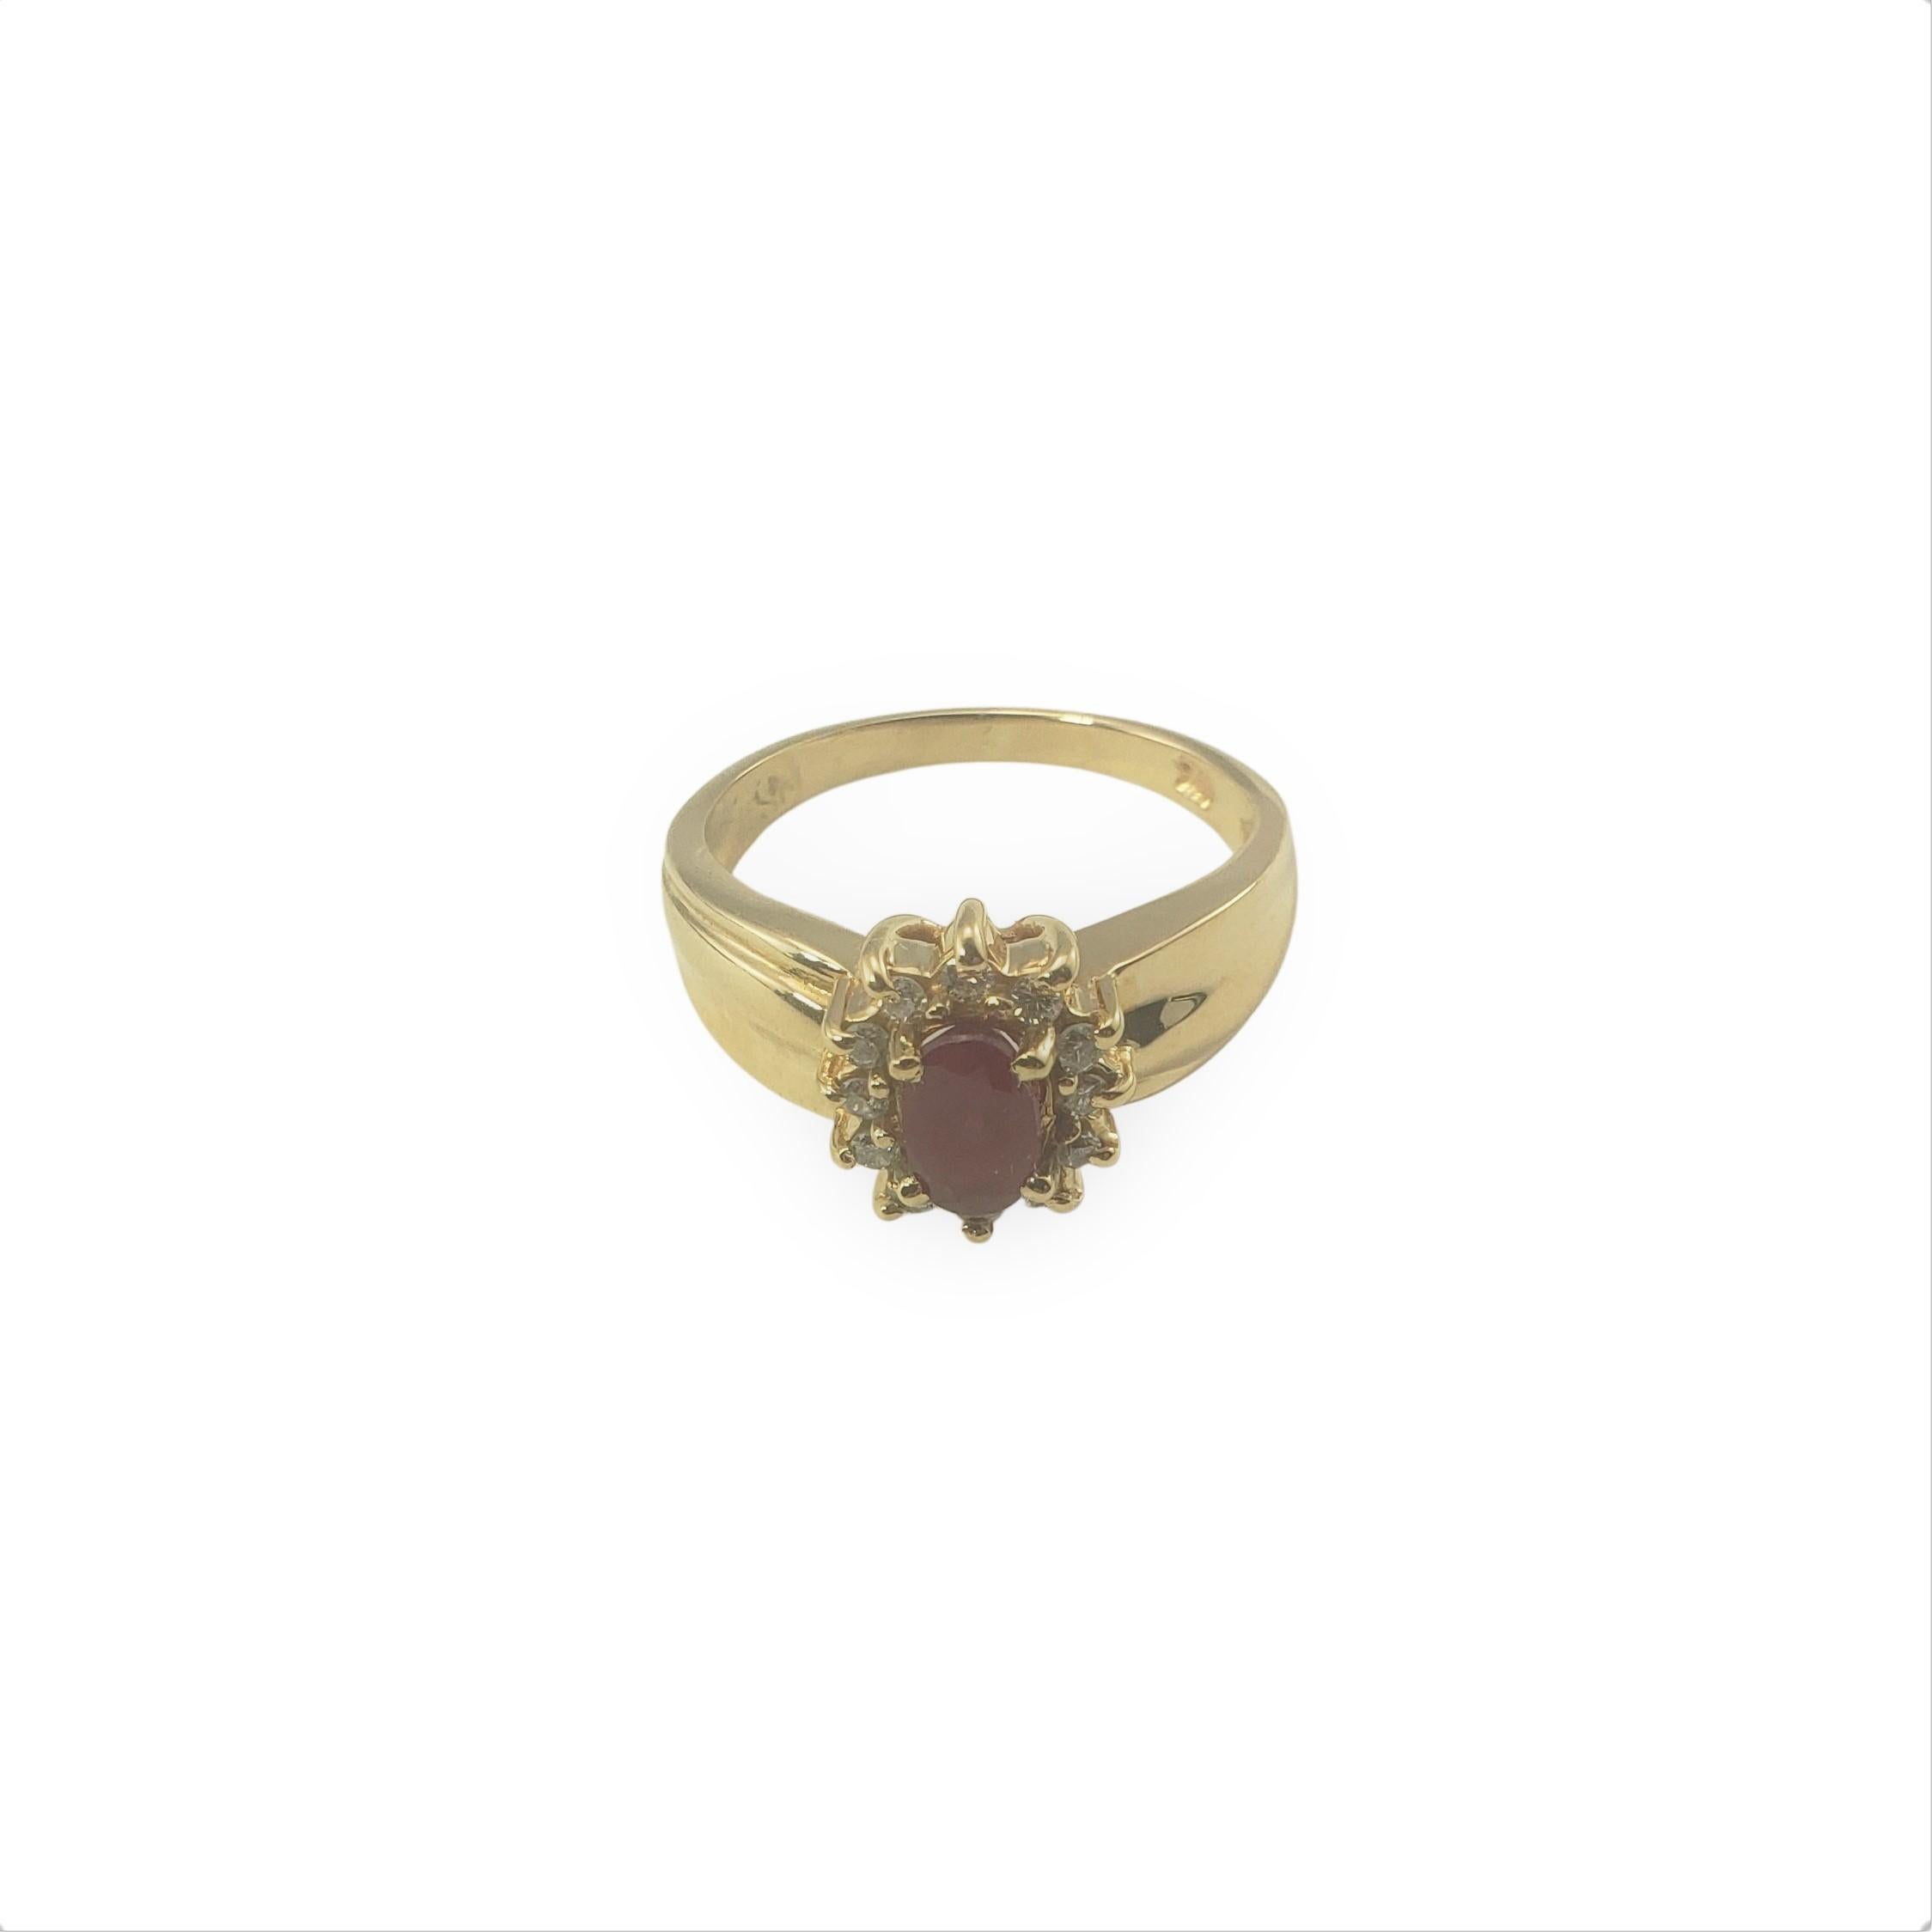 14 Karat Yellow Gold Ruby and Diamond Ring Size 5.5-

This lovely ring features one oval ruby (7 mm x 5 mm) surrounded by 12 round brilliant cut diamonds and set in 14K yellow gold.  Width:  10 mm.  Shank:  2 mm.  

Approximate total diamond weight: